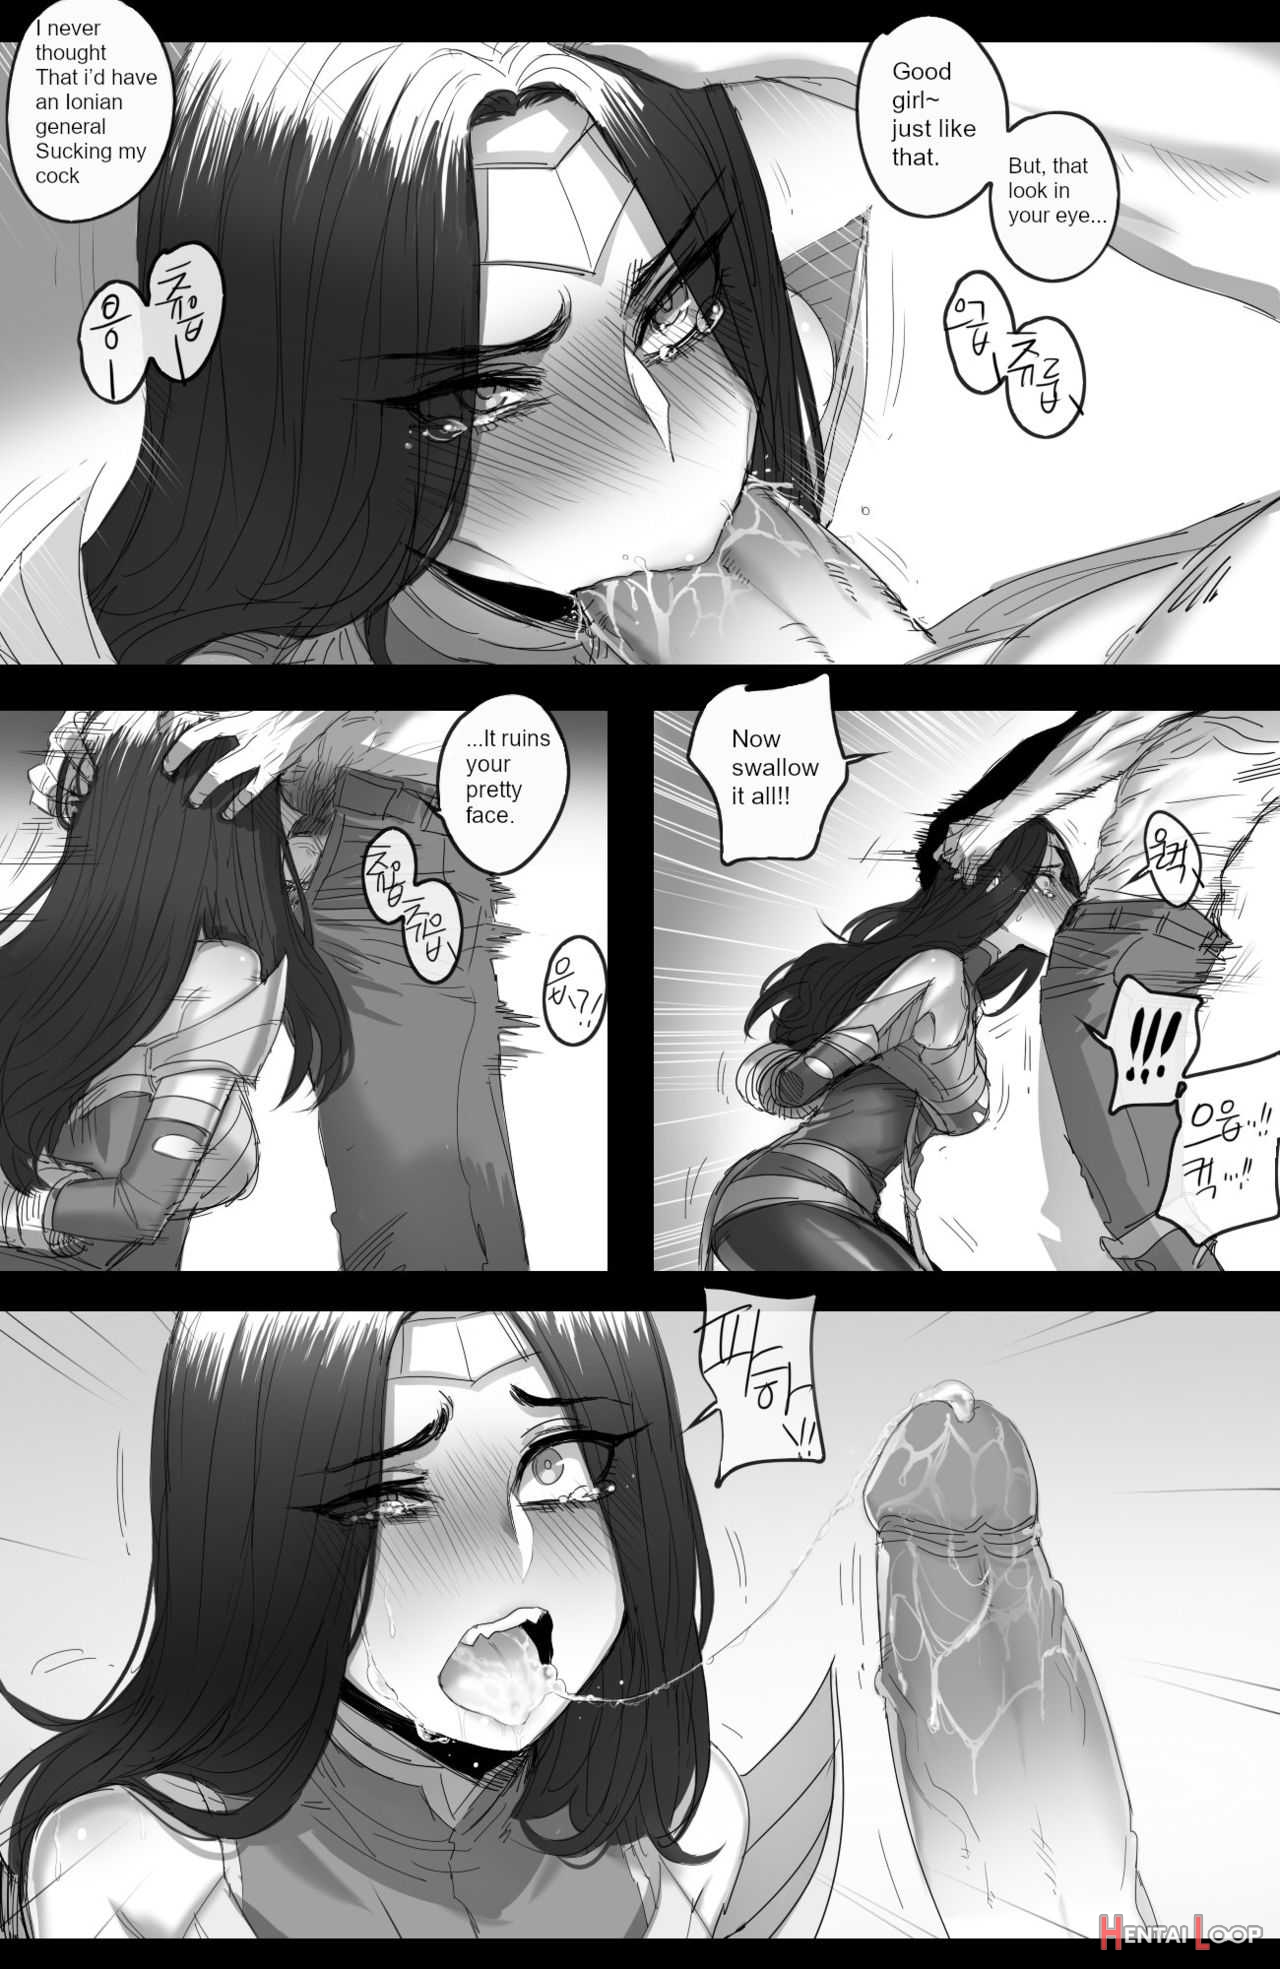 The Fall Of Irelia page 6